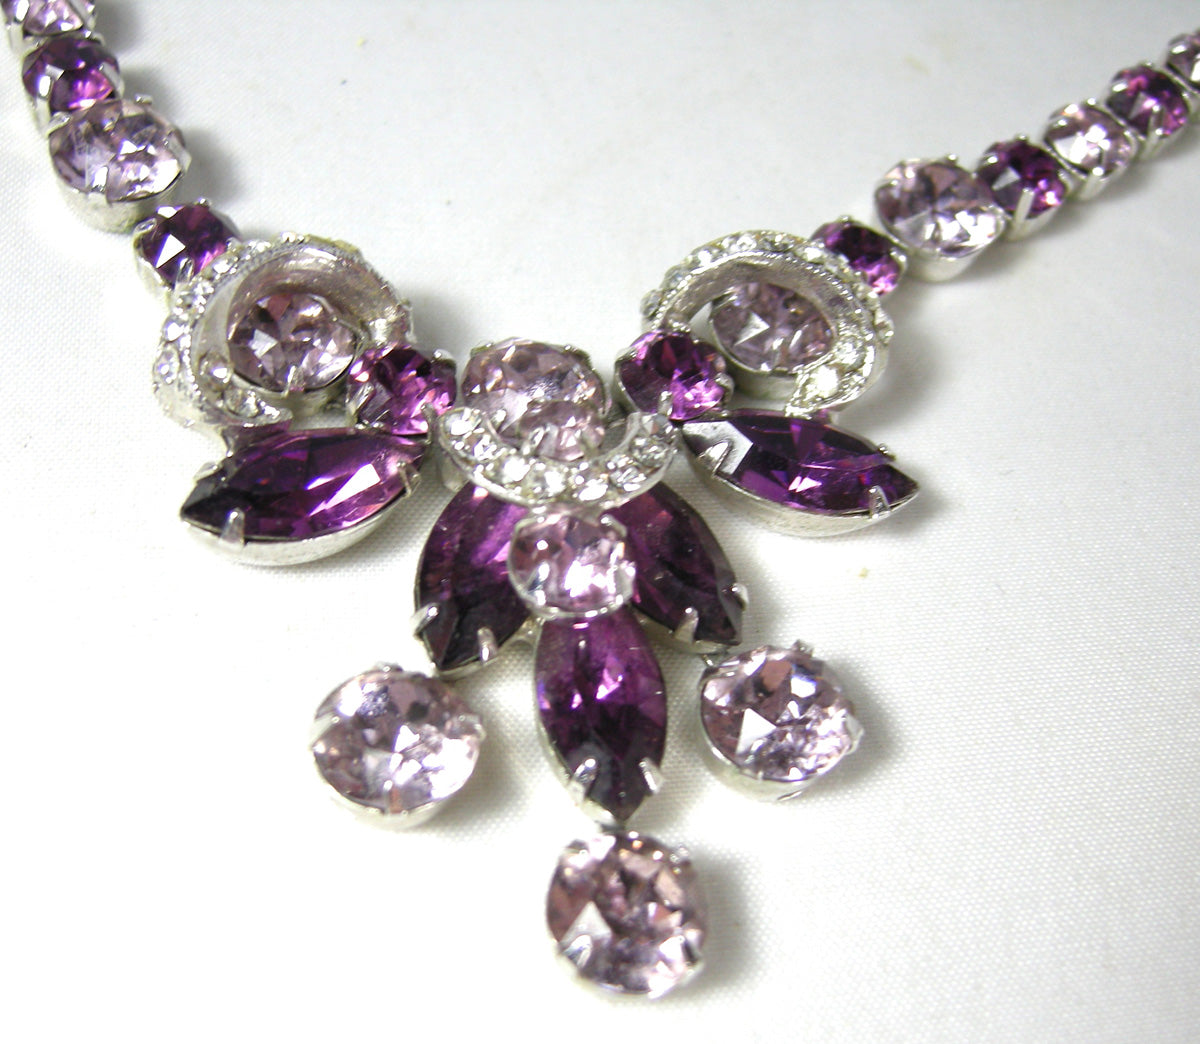 Crystal Wishes Magnetic Interchangeable Necklace (Sterling  Silvertone/Purple)